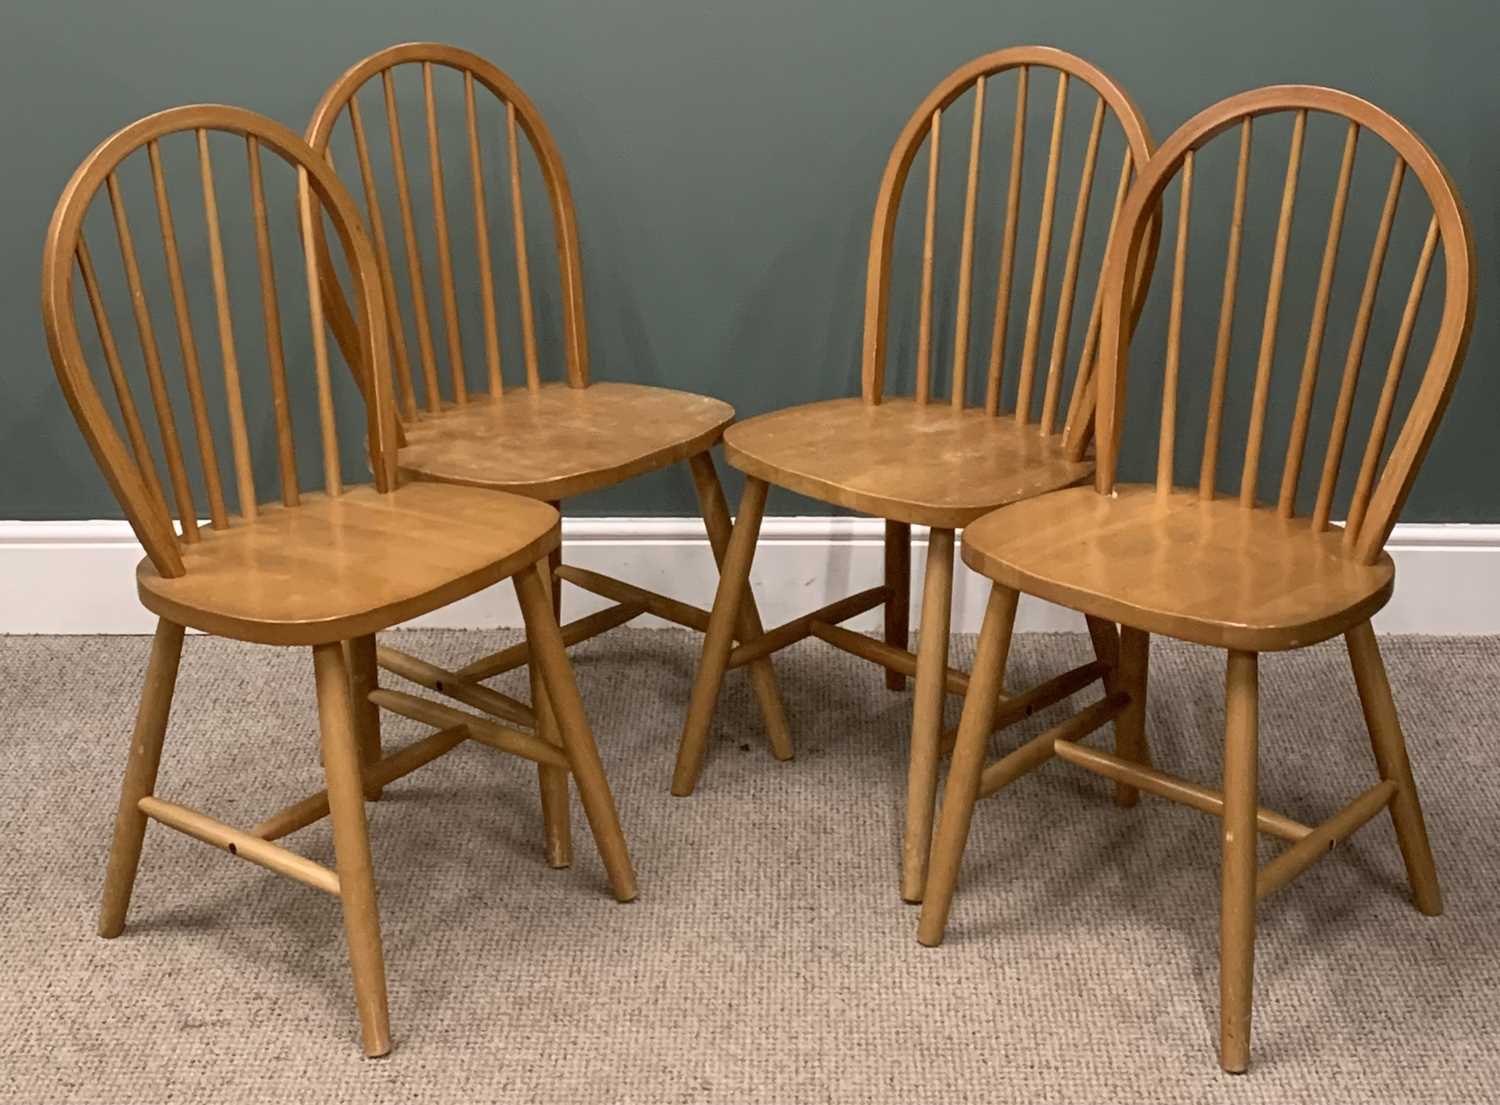 MODERN BREAKFAST TABLE & FOUR HOOP BACK CHAIRS, the table, 76 (h) x 108cms (diam.), the chairs 93 ( - Image 3 of 3